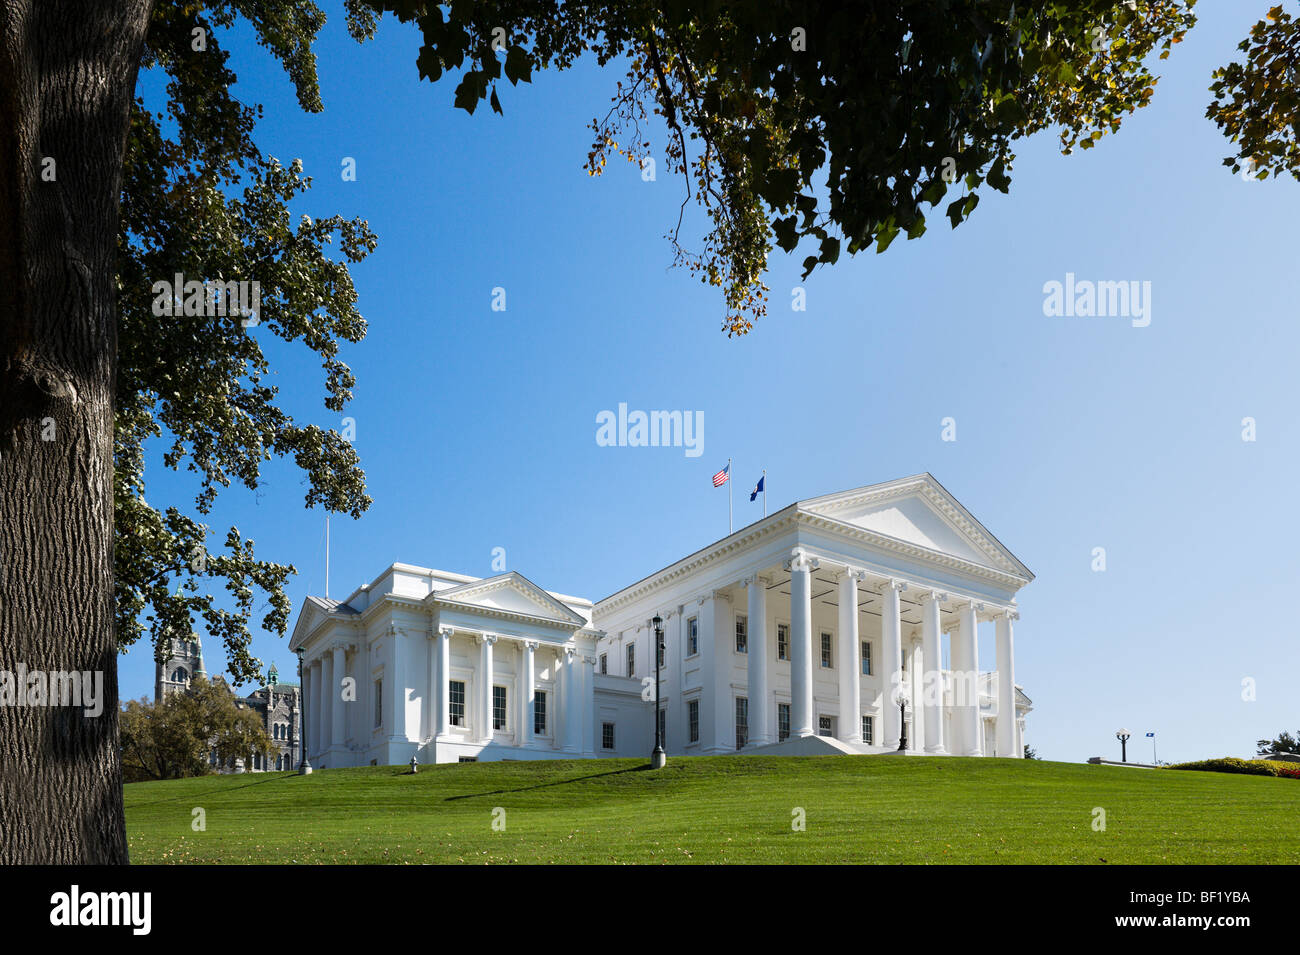 The Virginia State Capitol Building, Court End District, Richmond, Virginia, USA Stock Photo